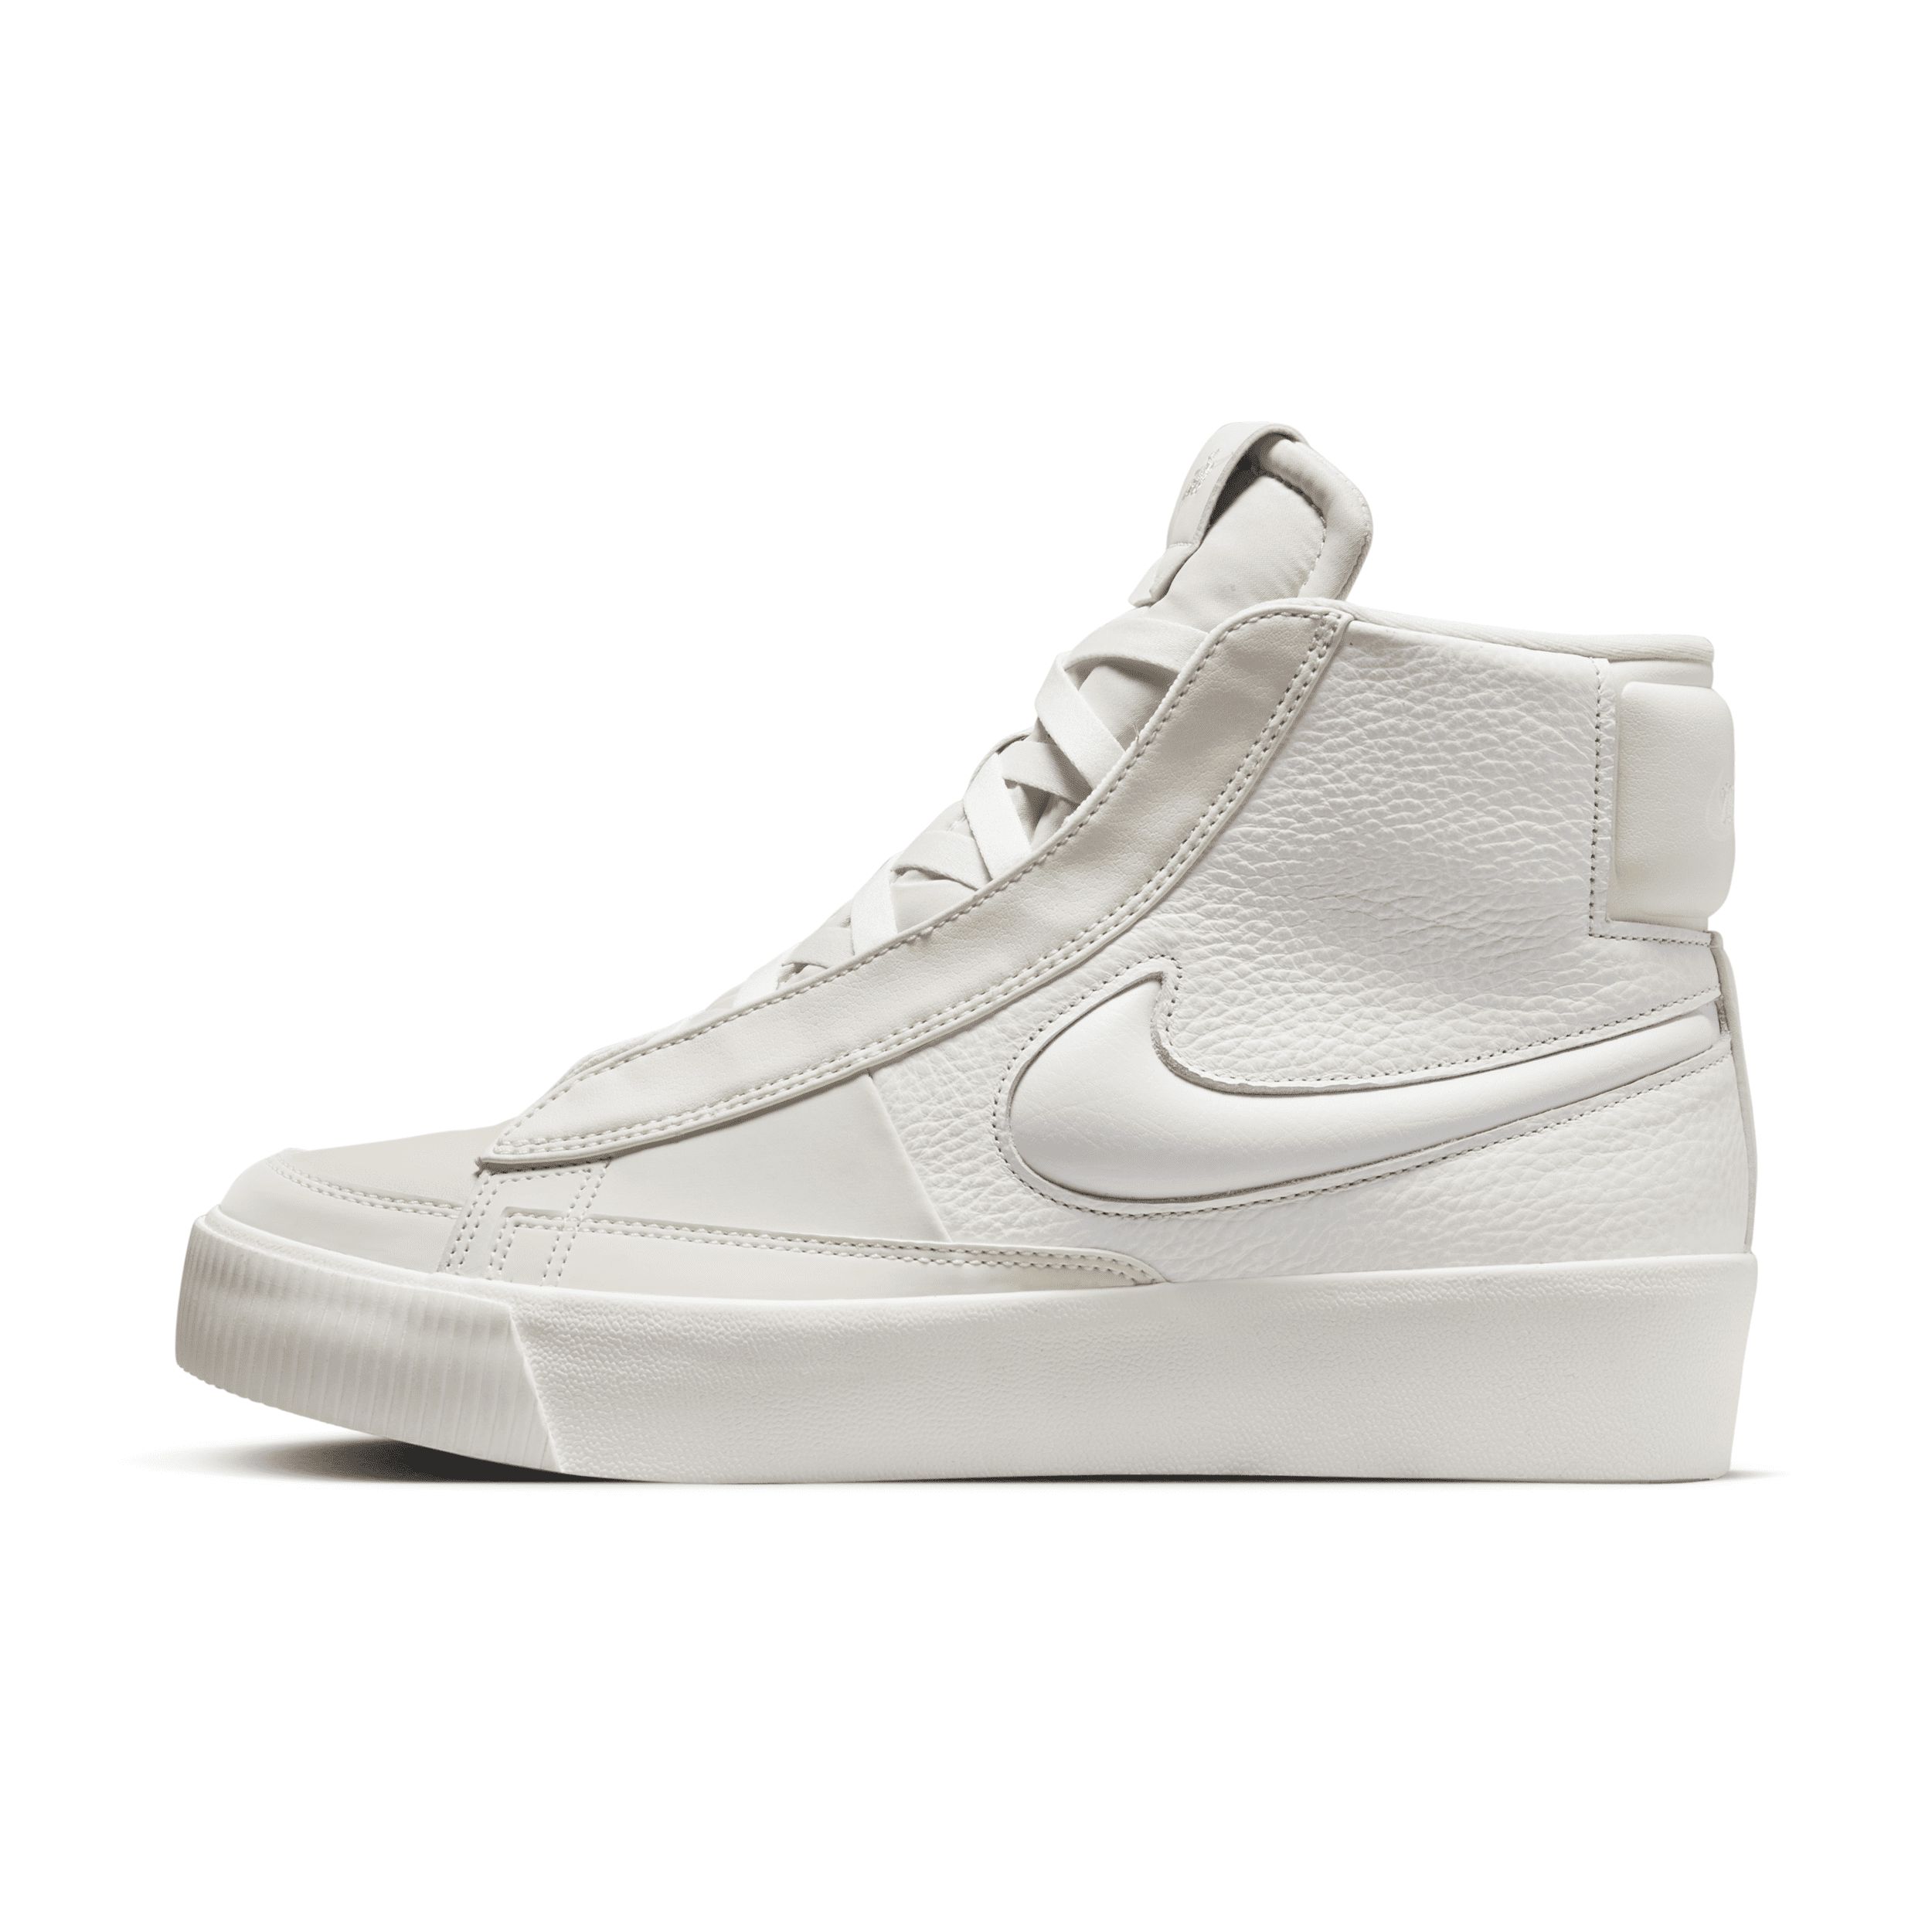 Nike Women's Blazer Mid Victory Shoes in White, Size: 5 | DR2948-100 | Nike (US)